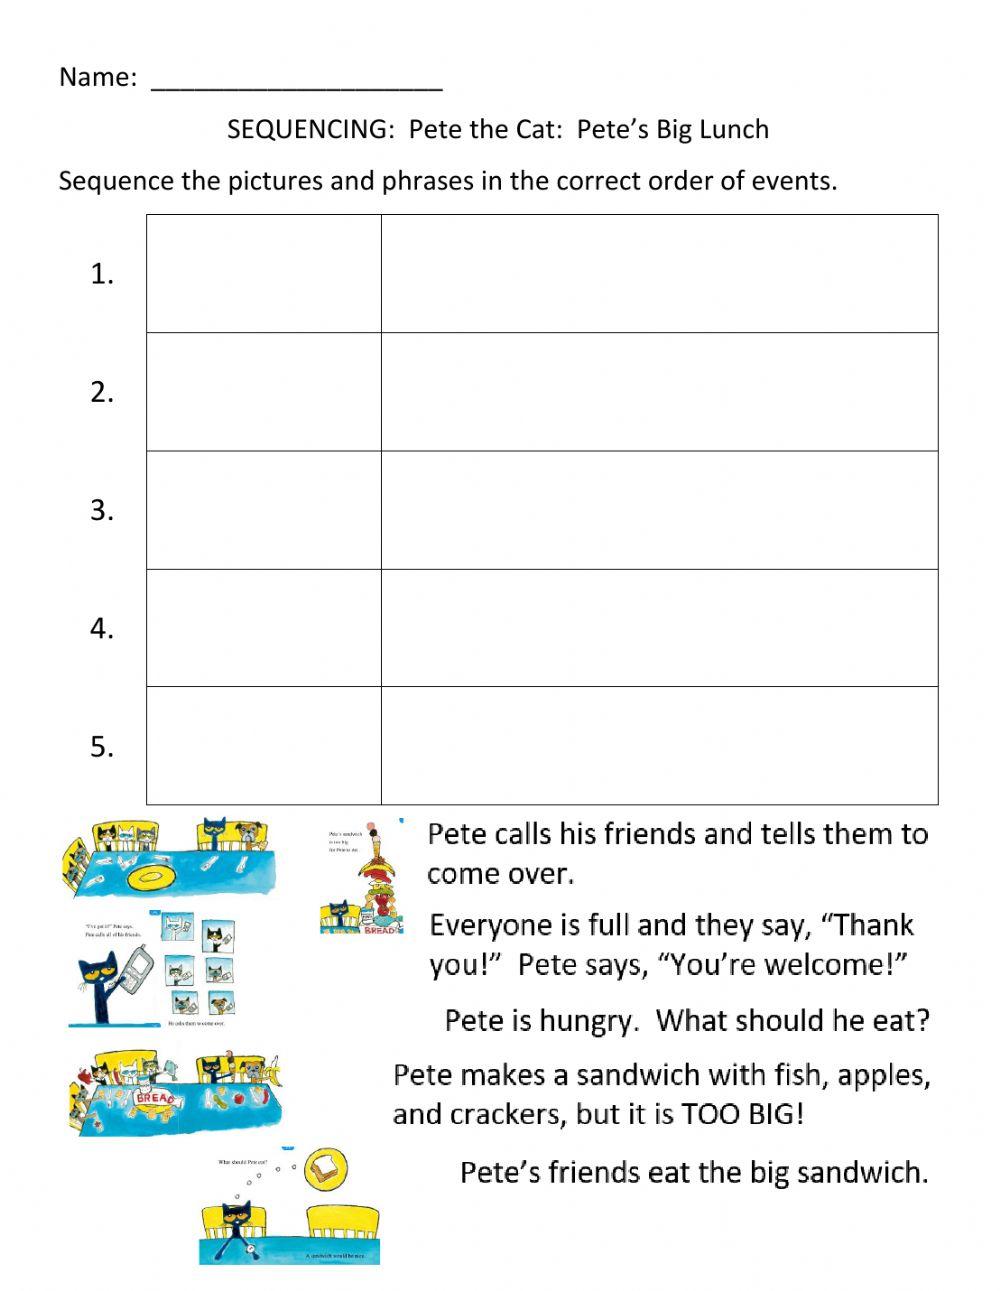 SEQUENCING:  Pete the Cat